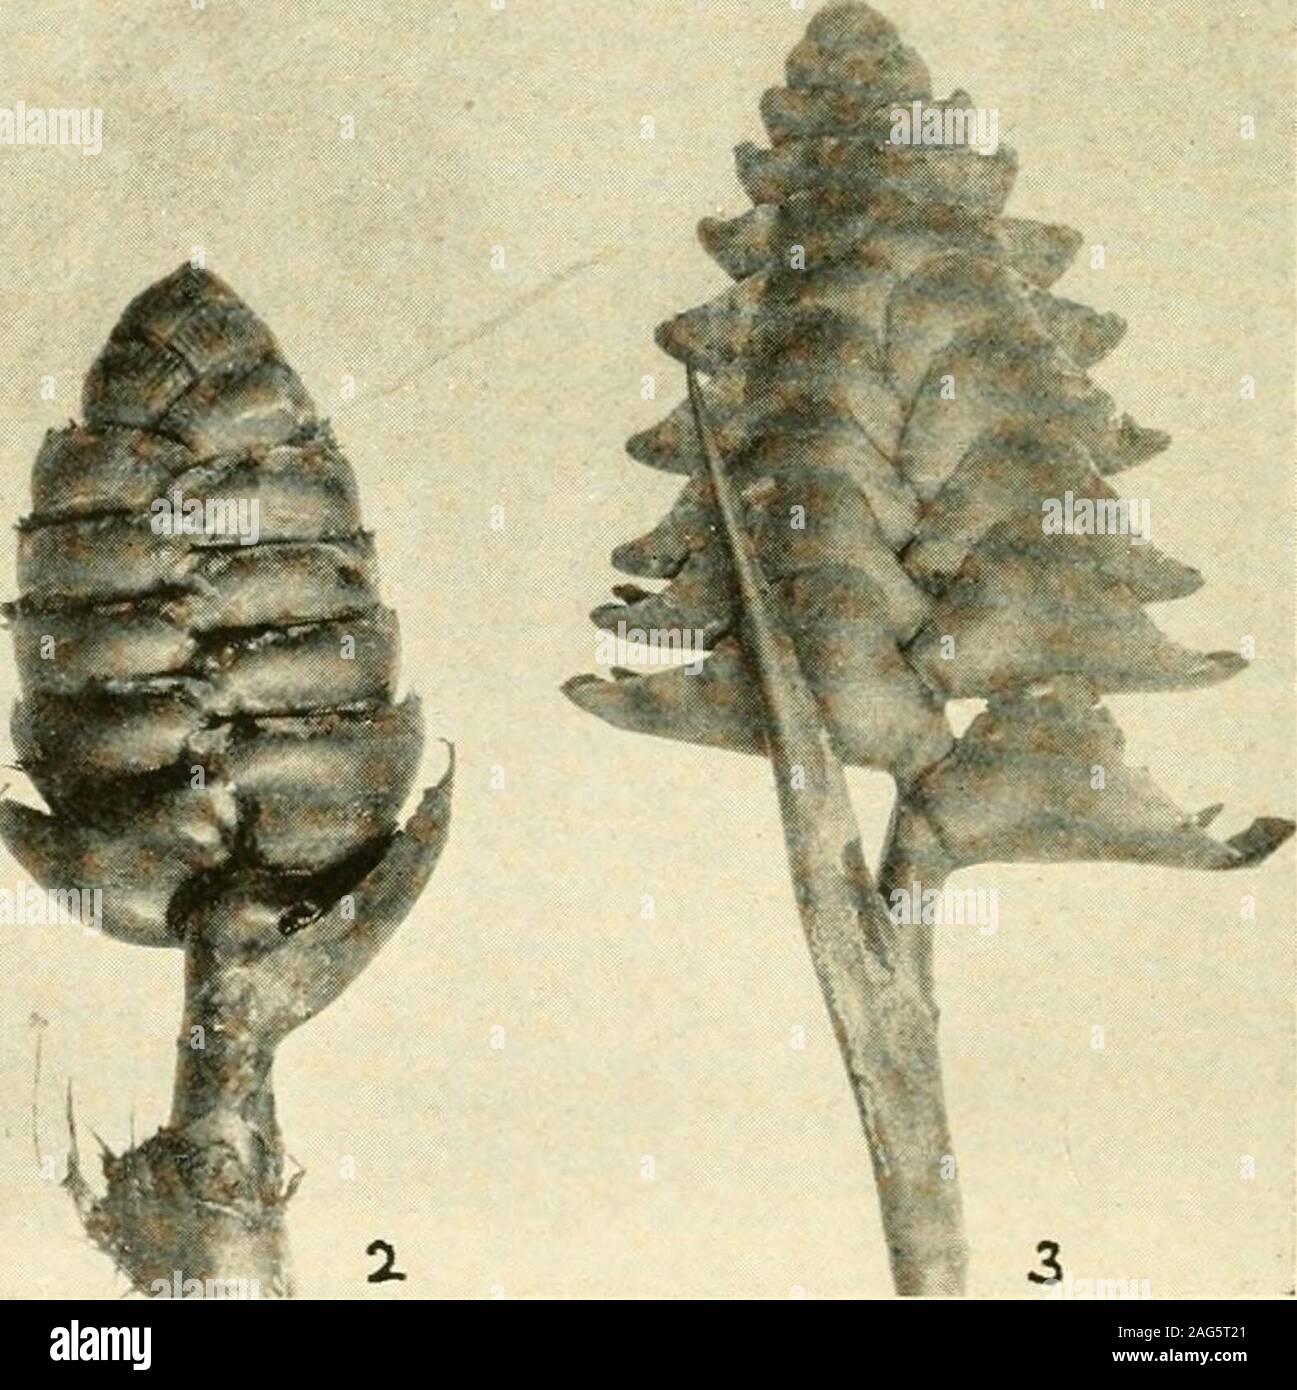 . A year of Costa Rican natural history. I Y. ild Cintrer—Costus malortieanus. I. Vijagua, Calalhea msv^nis, with yellow bracts. 2. llehconw mana-and 3. //. imhricata, both with dark red bracts. To face p. 257 TURRIALBA AND PERALTA 257 soft mud beneath the grass. However, I did obtain somespecies of dragonflies that I had never, or but rarely, takenmyself in Costa Rica. Feeding on a patch of morning-glory{Ip07ncBa), known in Costa Rica as churristate—thesame name is applied also to a mallow, Anoda hastata,—near the laguna were some uniformly dark metallic violet-blue Chrysomelid beetles {Hal Stock Photo